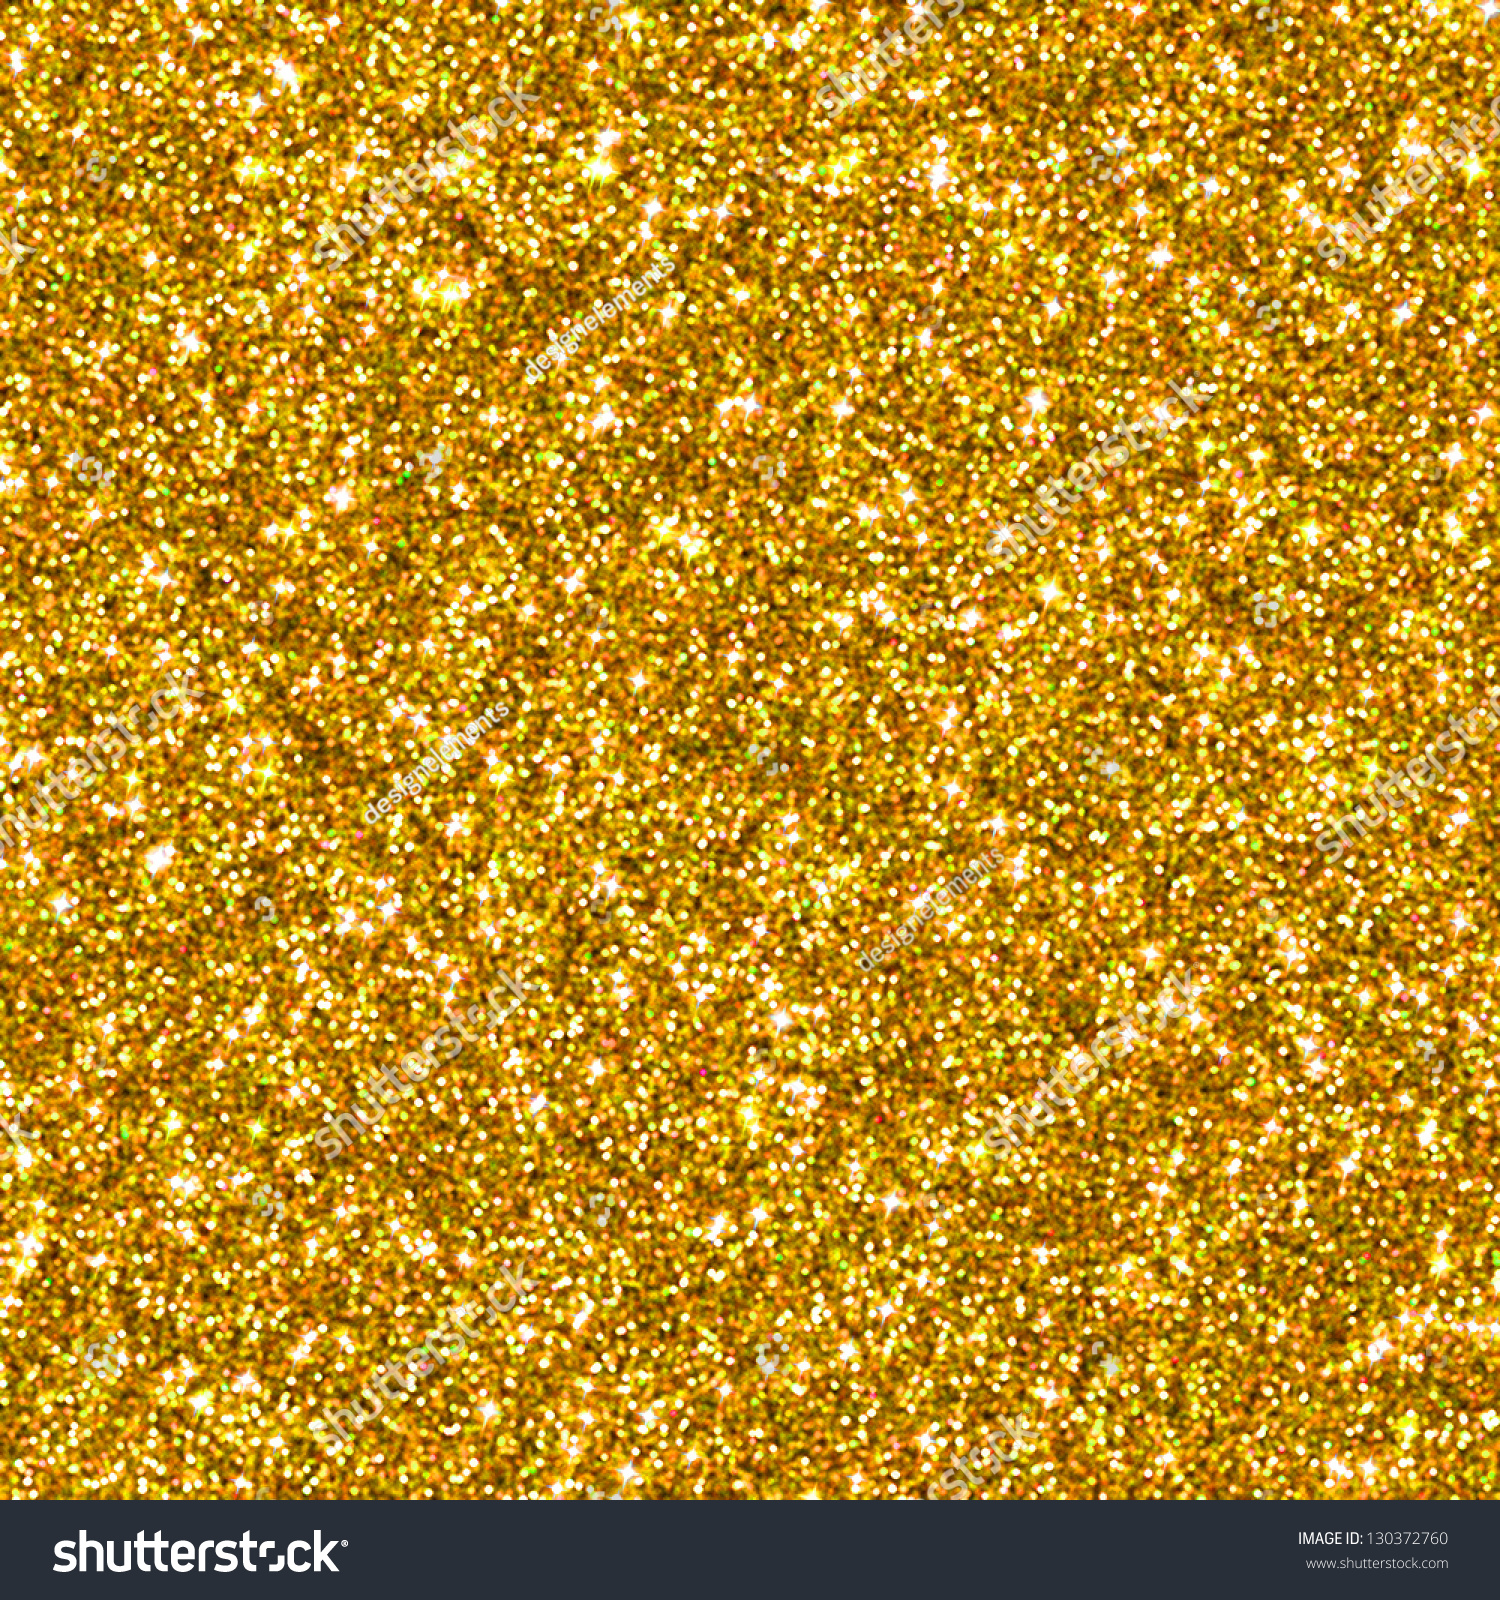 Golden Glitter For Texture Or Background Stock Photo